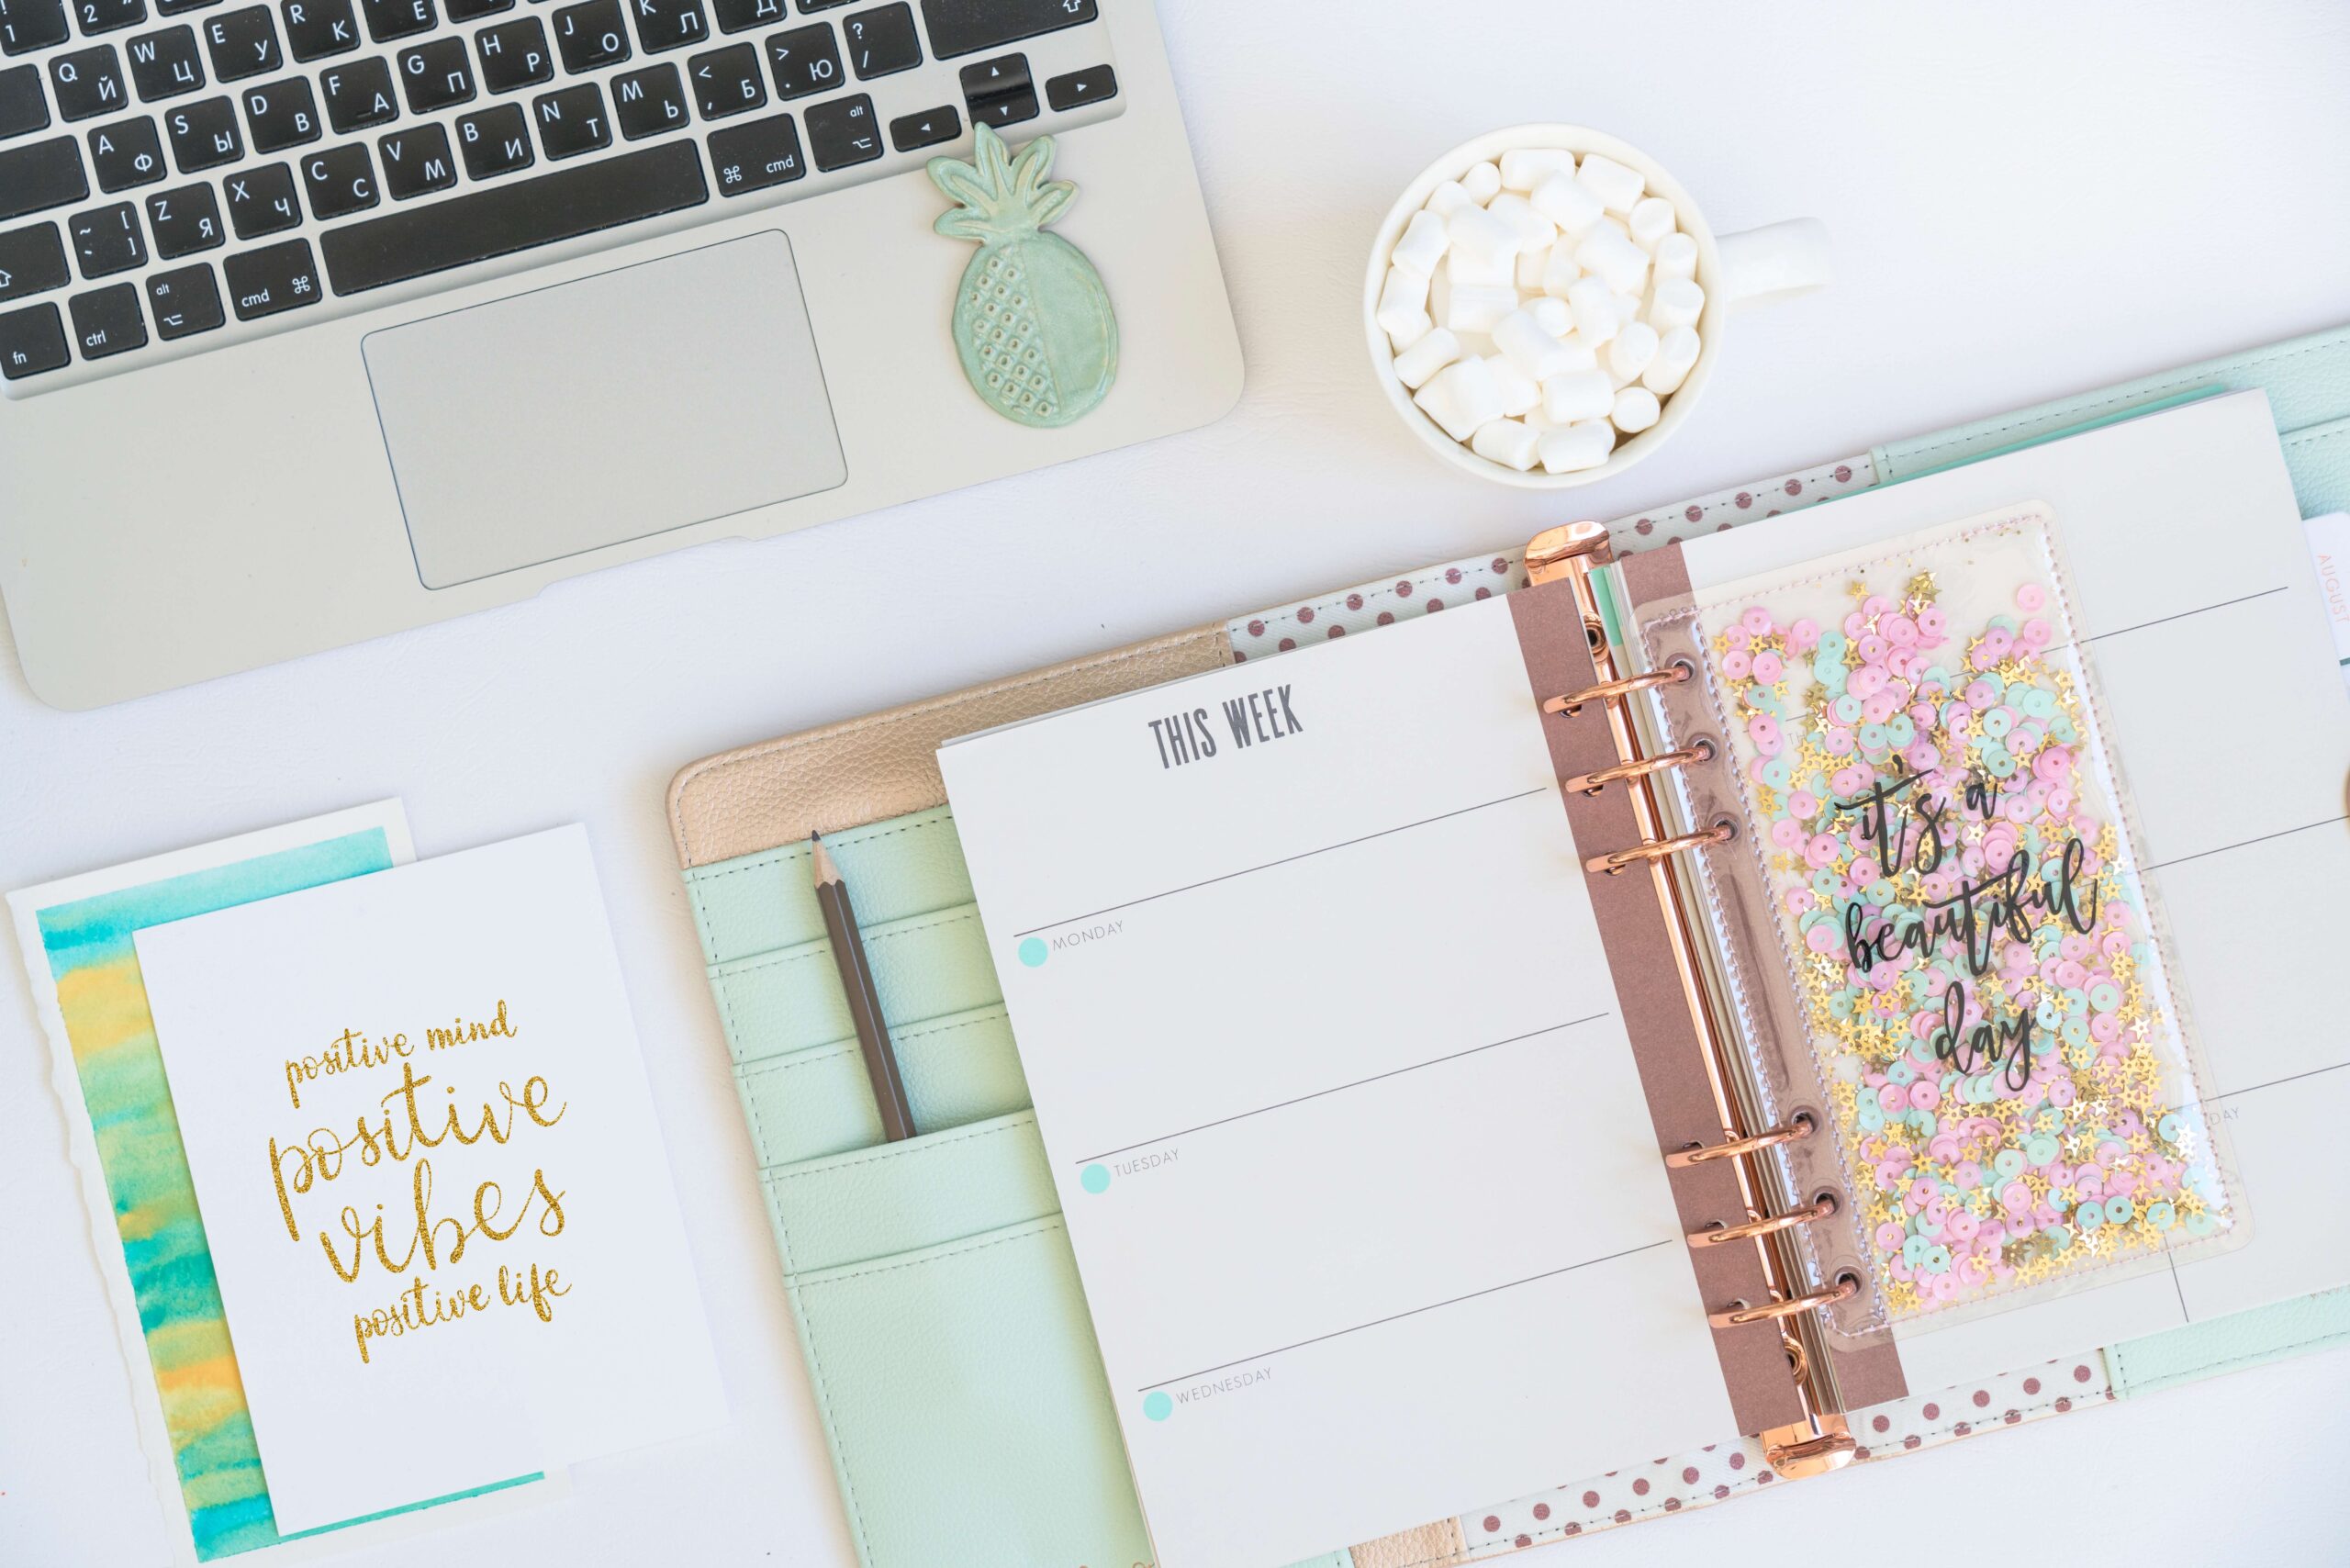 An overhead image of an open planner on a white desk, a laptop, a cup of coffee topped with marshmallows, and a card that reads "Positive mind, positive vibes, positive life."